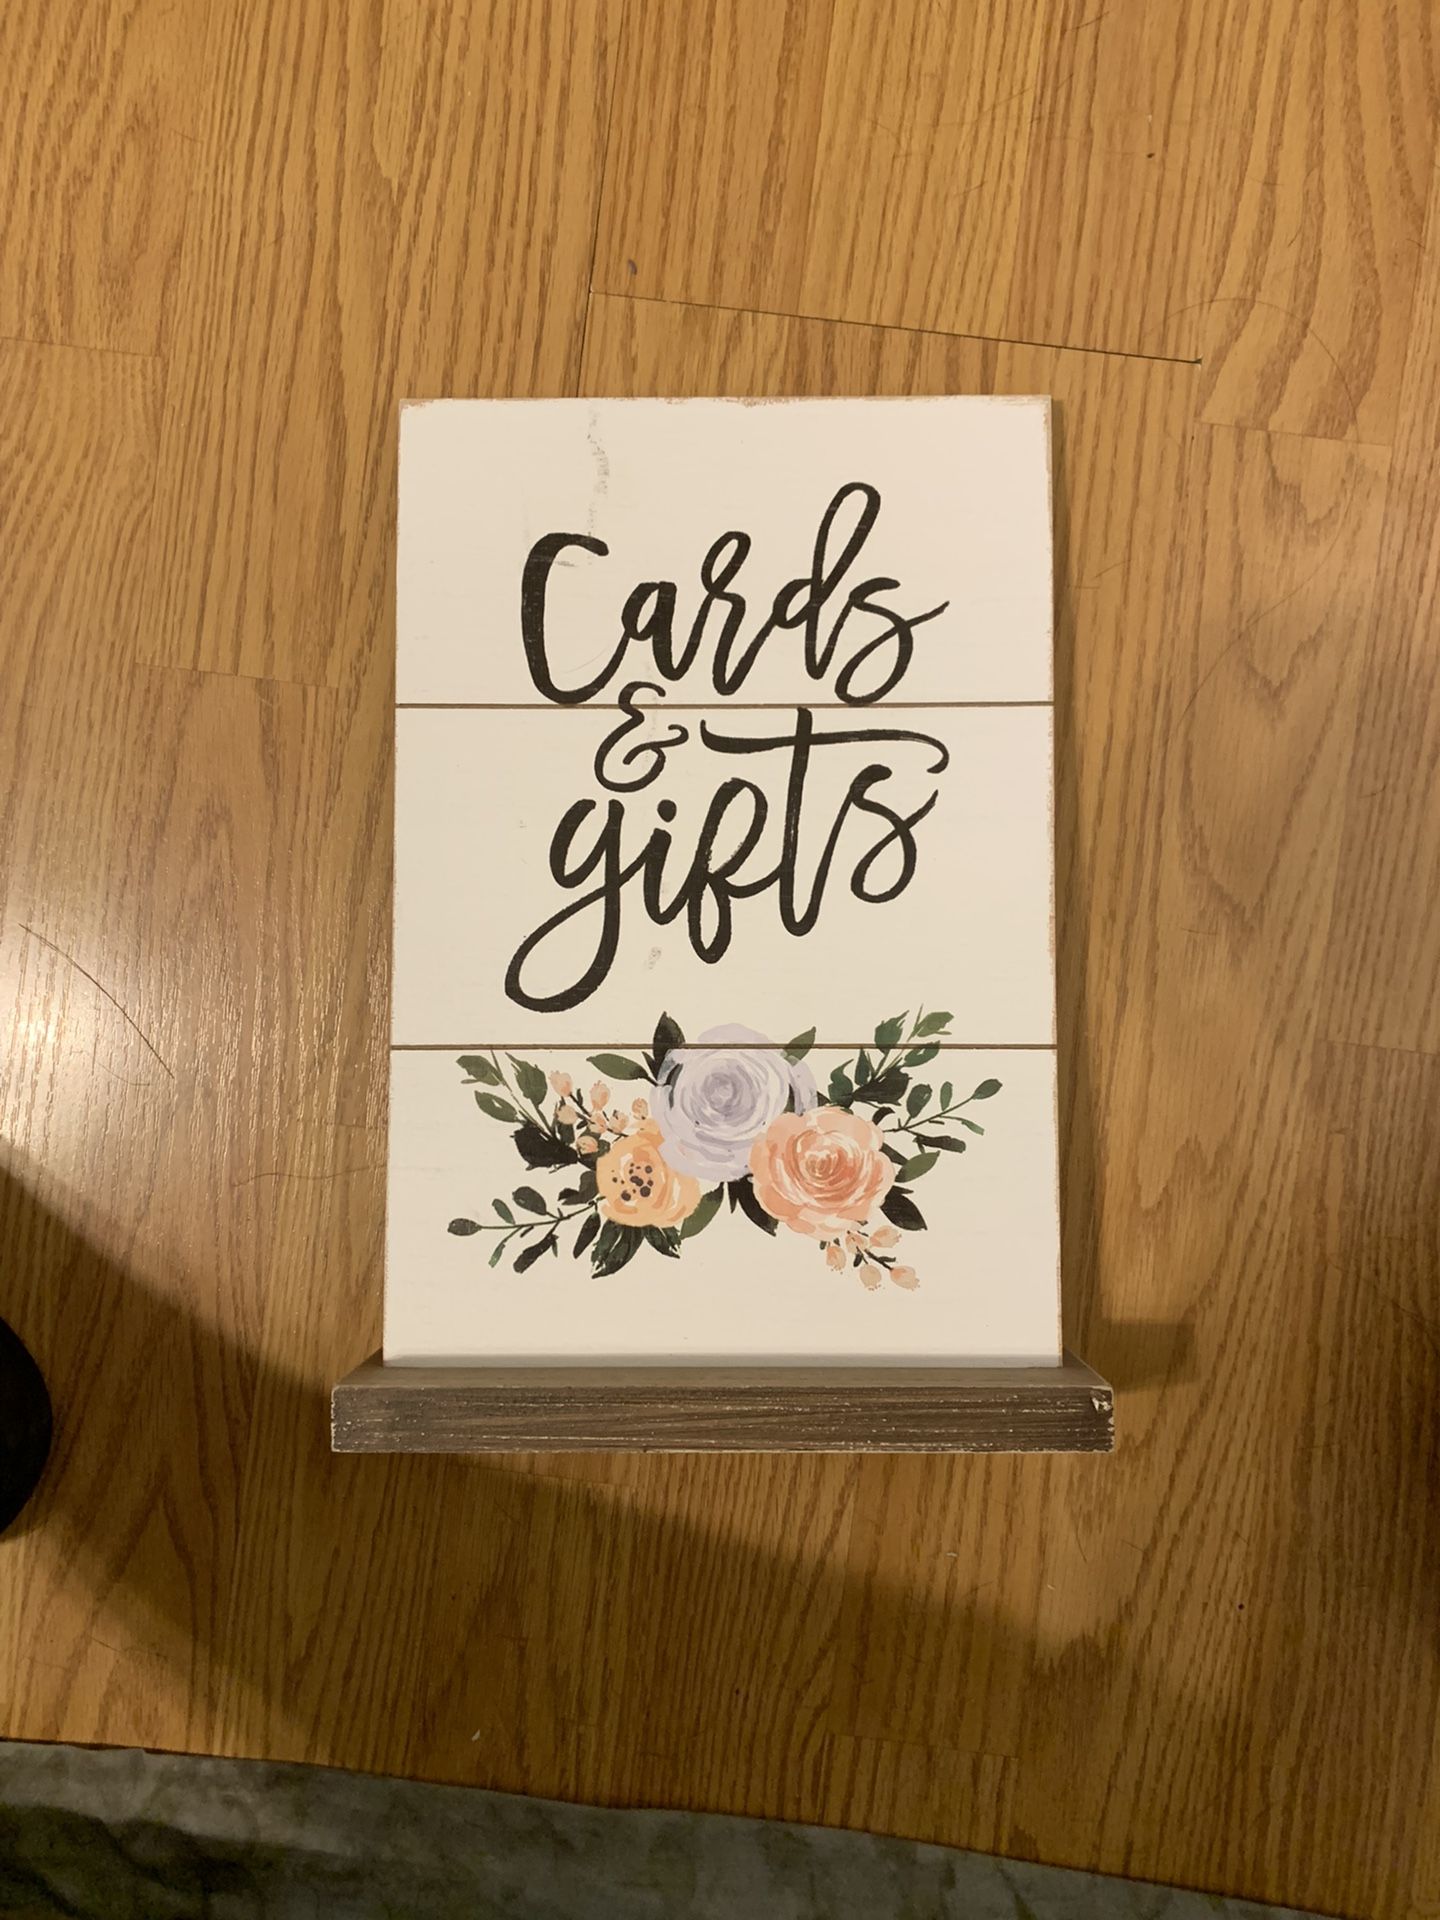 Gifts And Cards (weddings,birthdays,etc